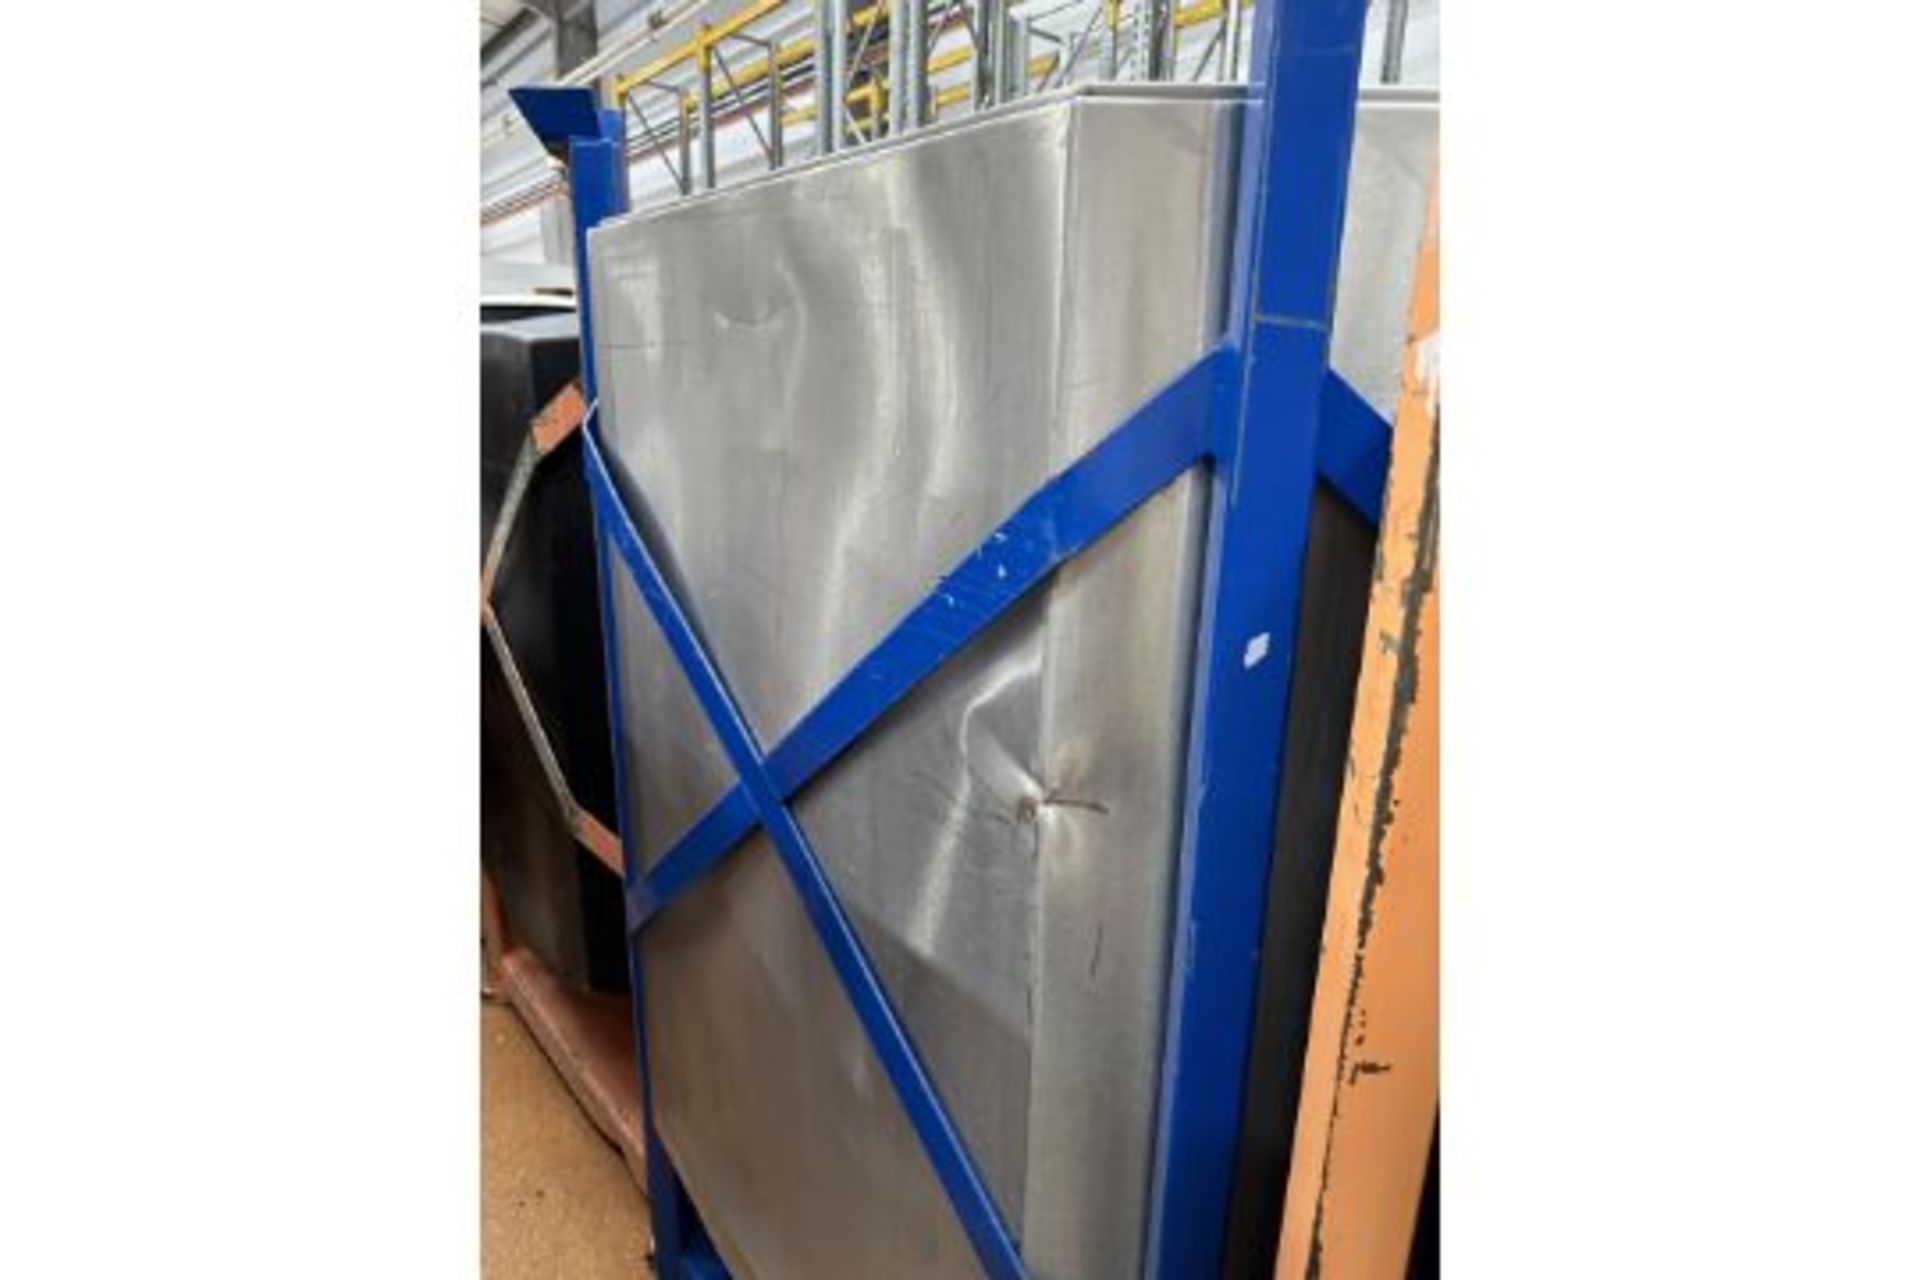 5 X FORKLIFTABLE FRAMES EACH HOLDING A S/S BIN. - Image 5 of 5